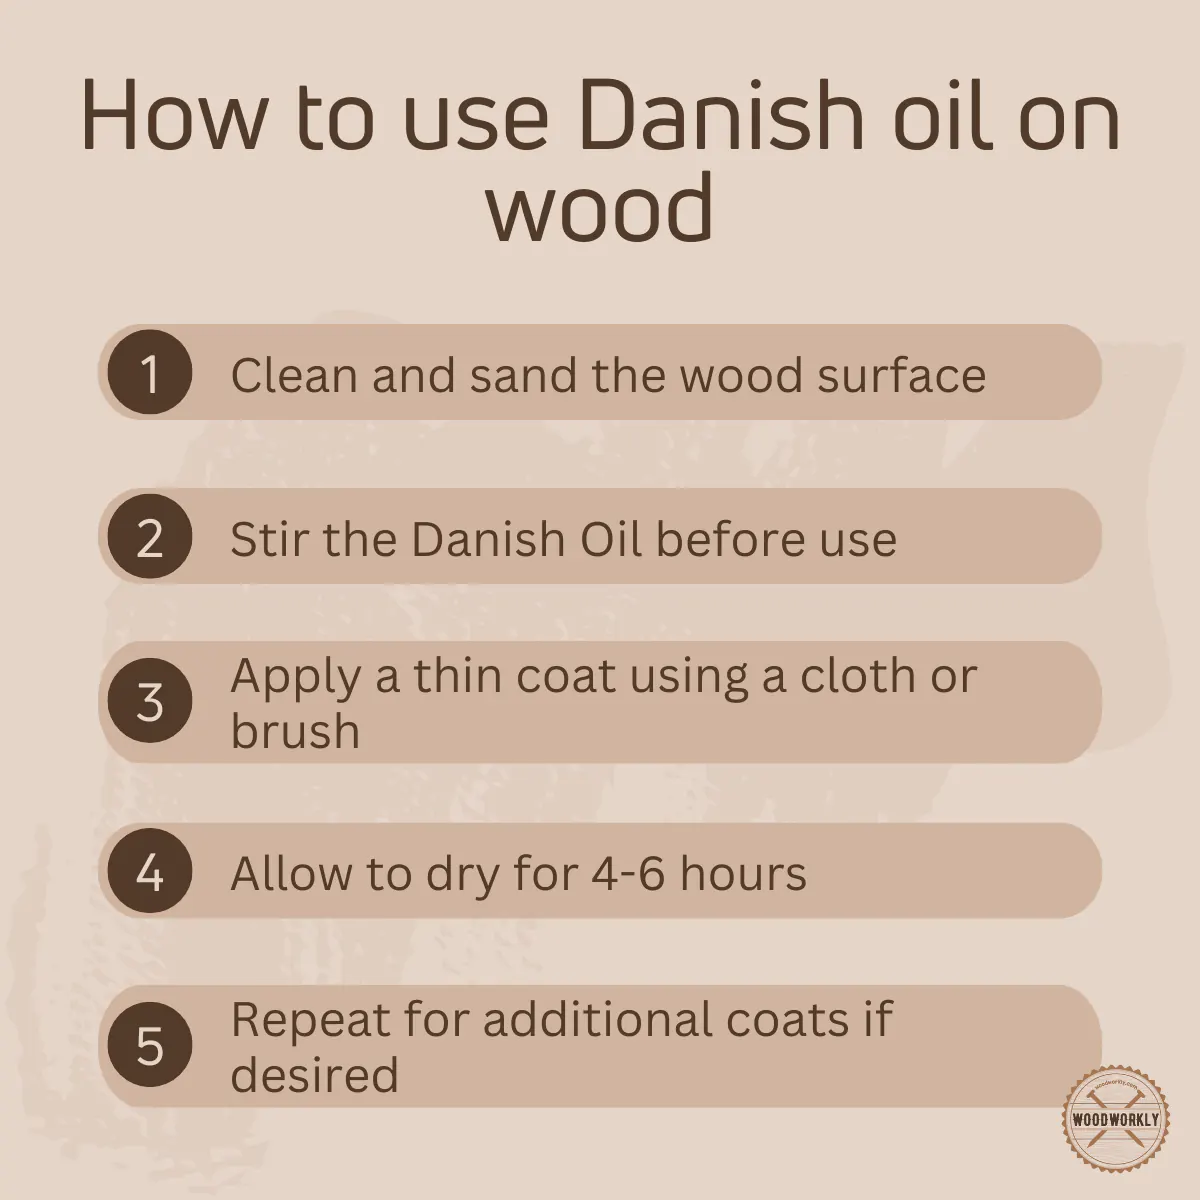 How to use Danish oil on wood